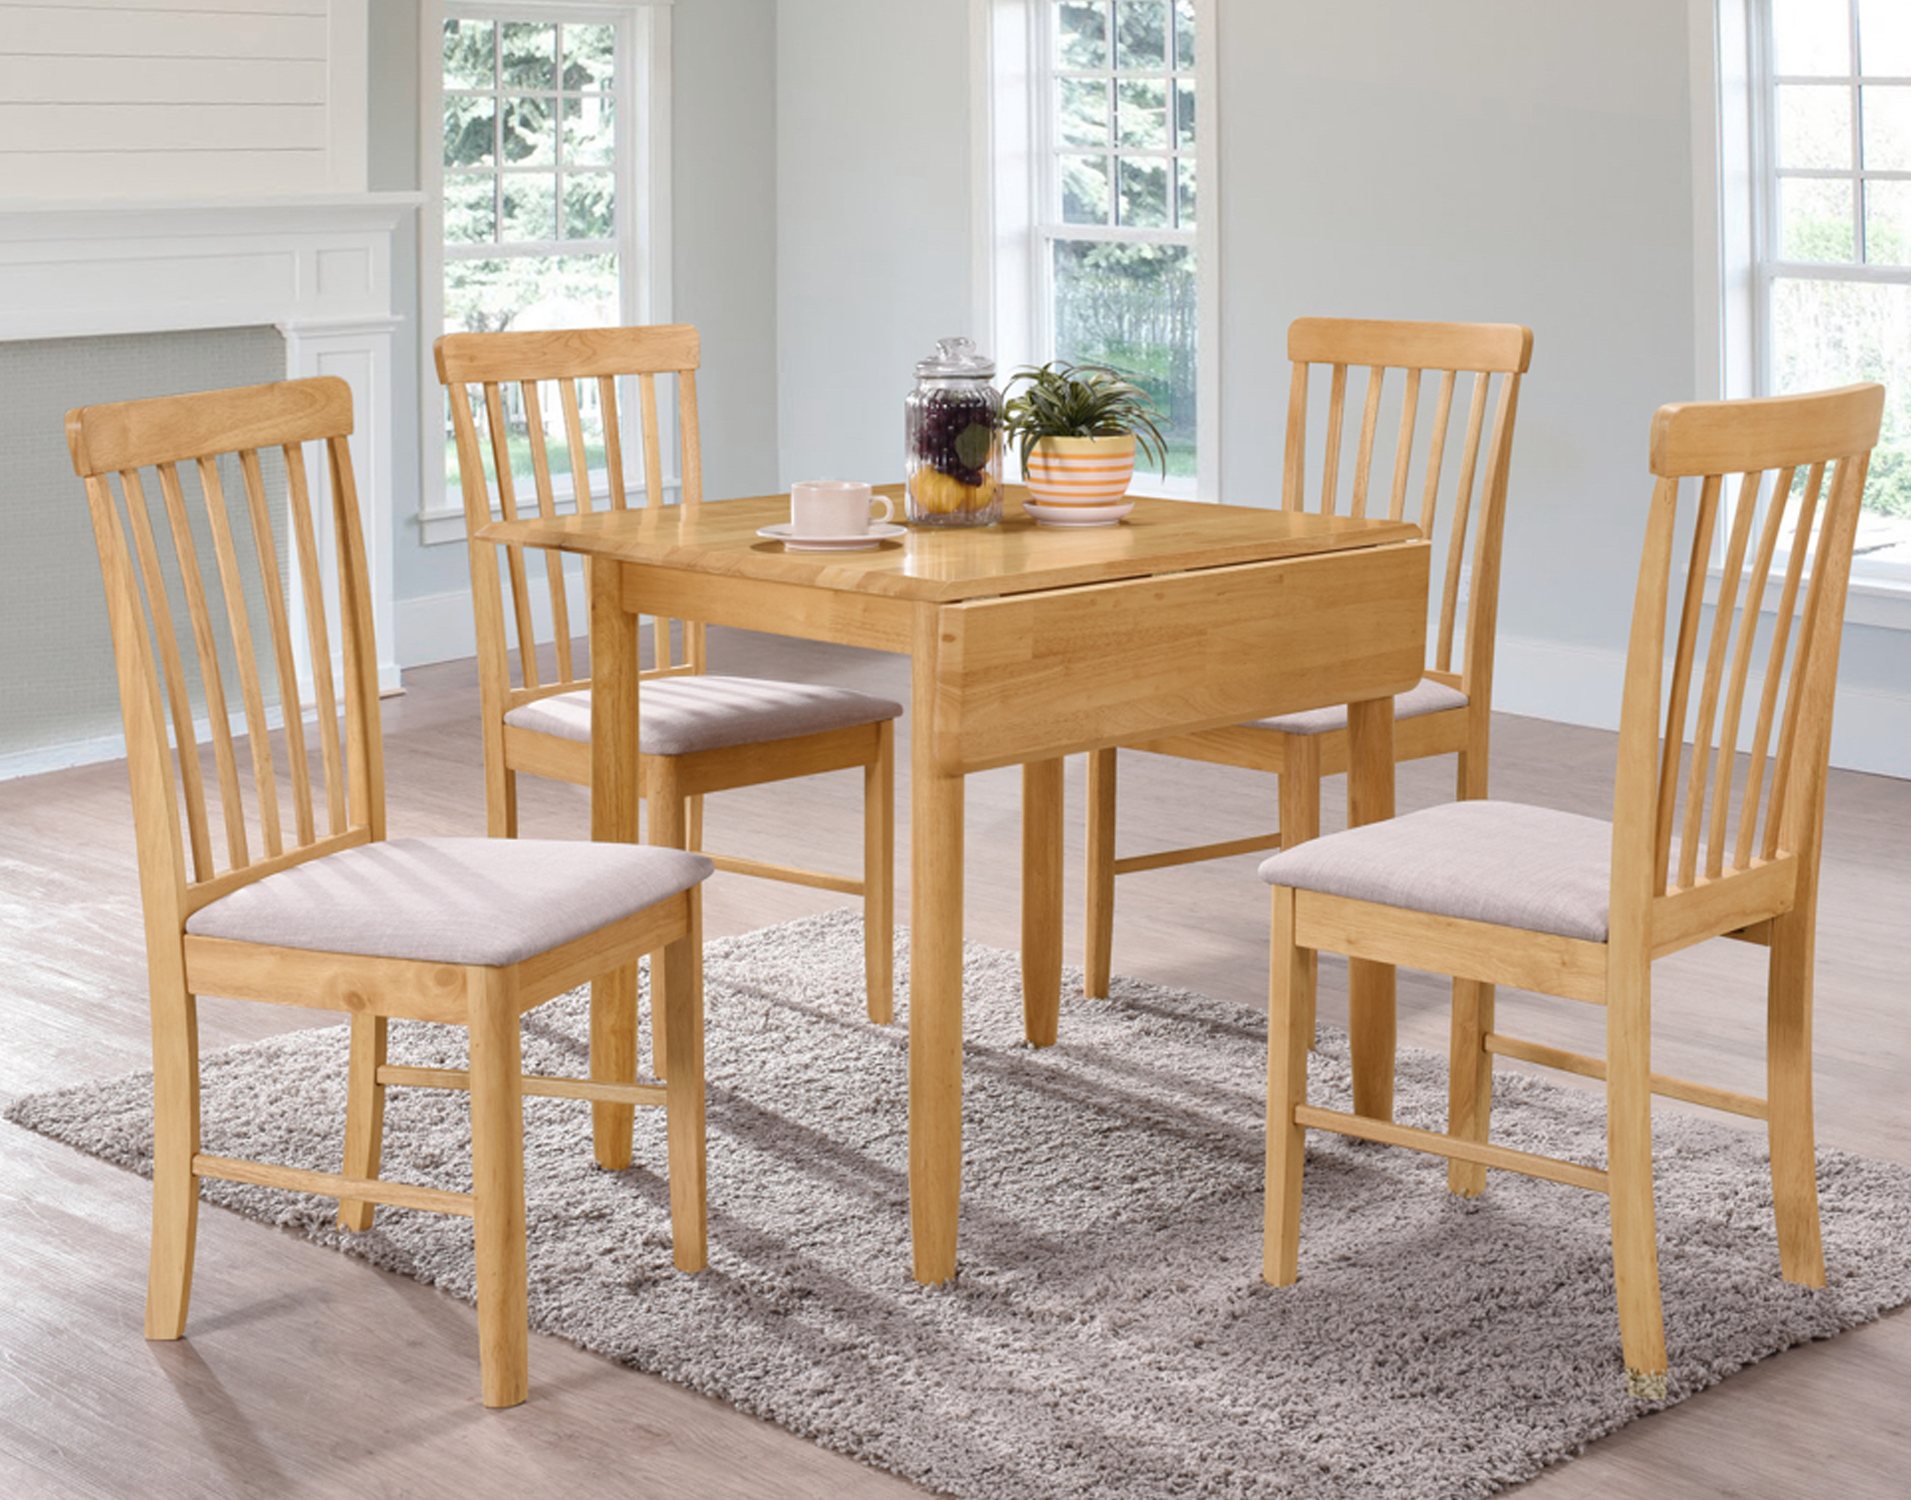 Small Square Dining Room Set Four Chairs